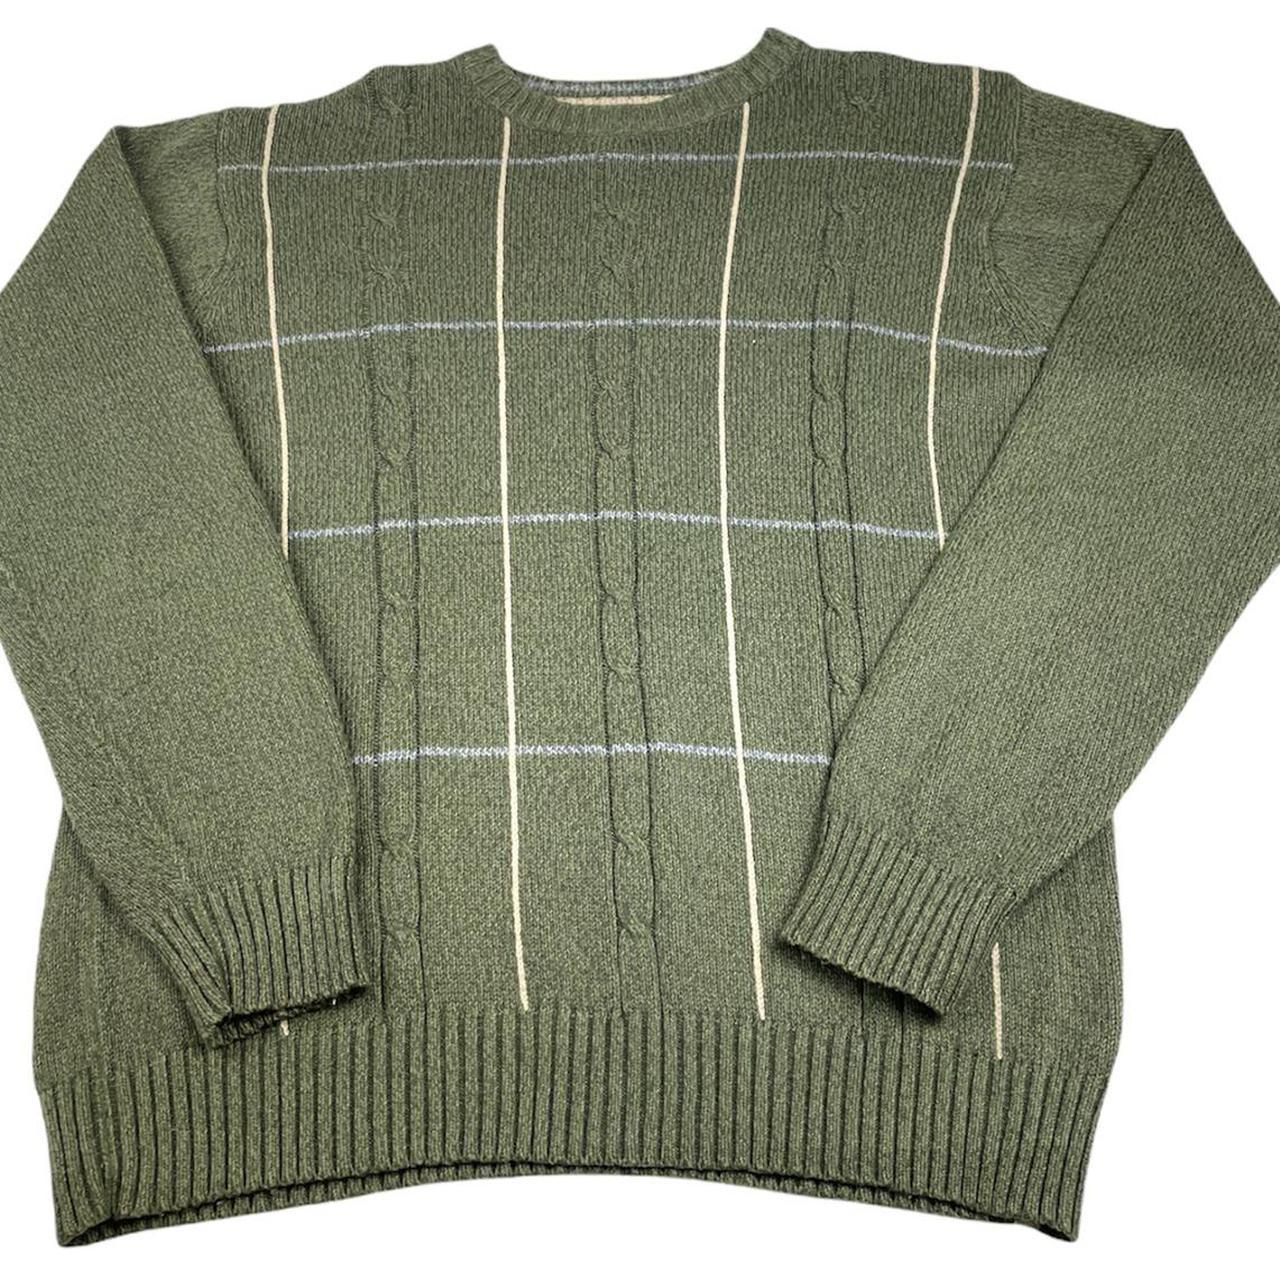 Product Image 1 - Men’s knitted Jumper/Basic editions 